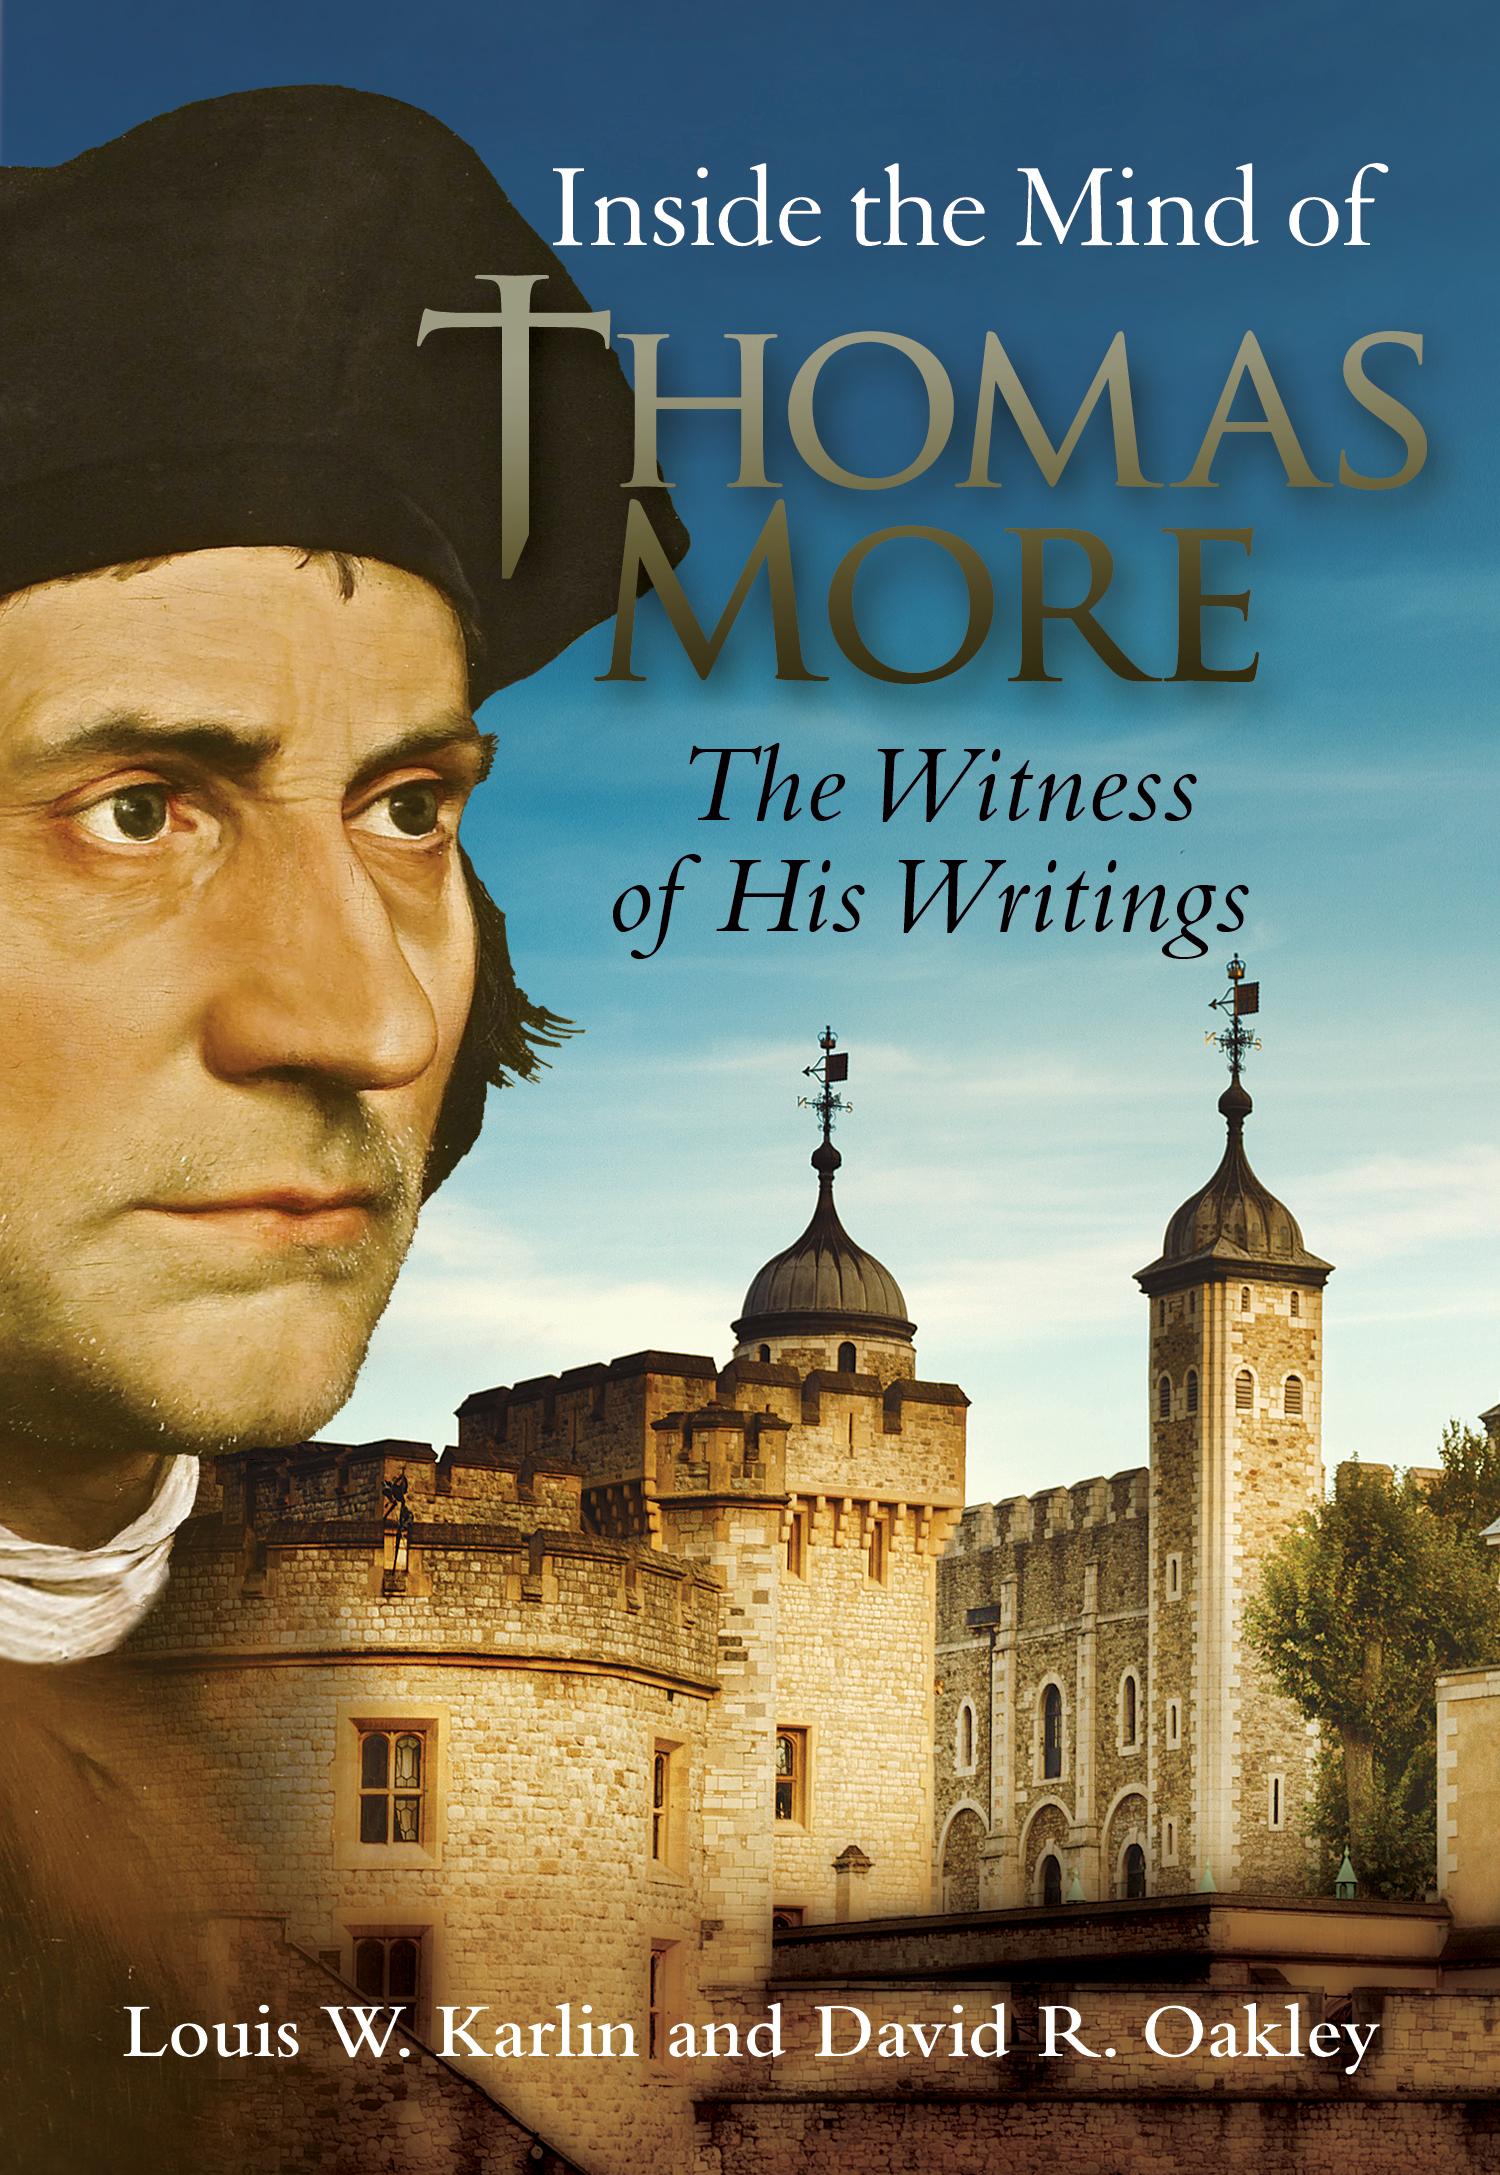 Inside the Mind of Thomas More: The Witness of His Writings - Scepter Publishers